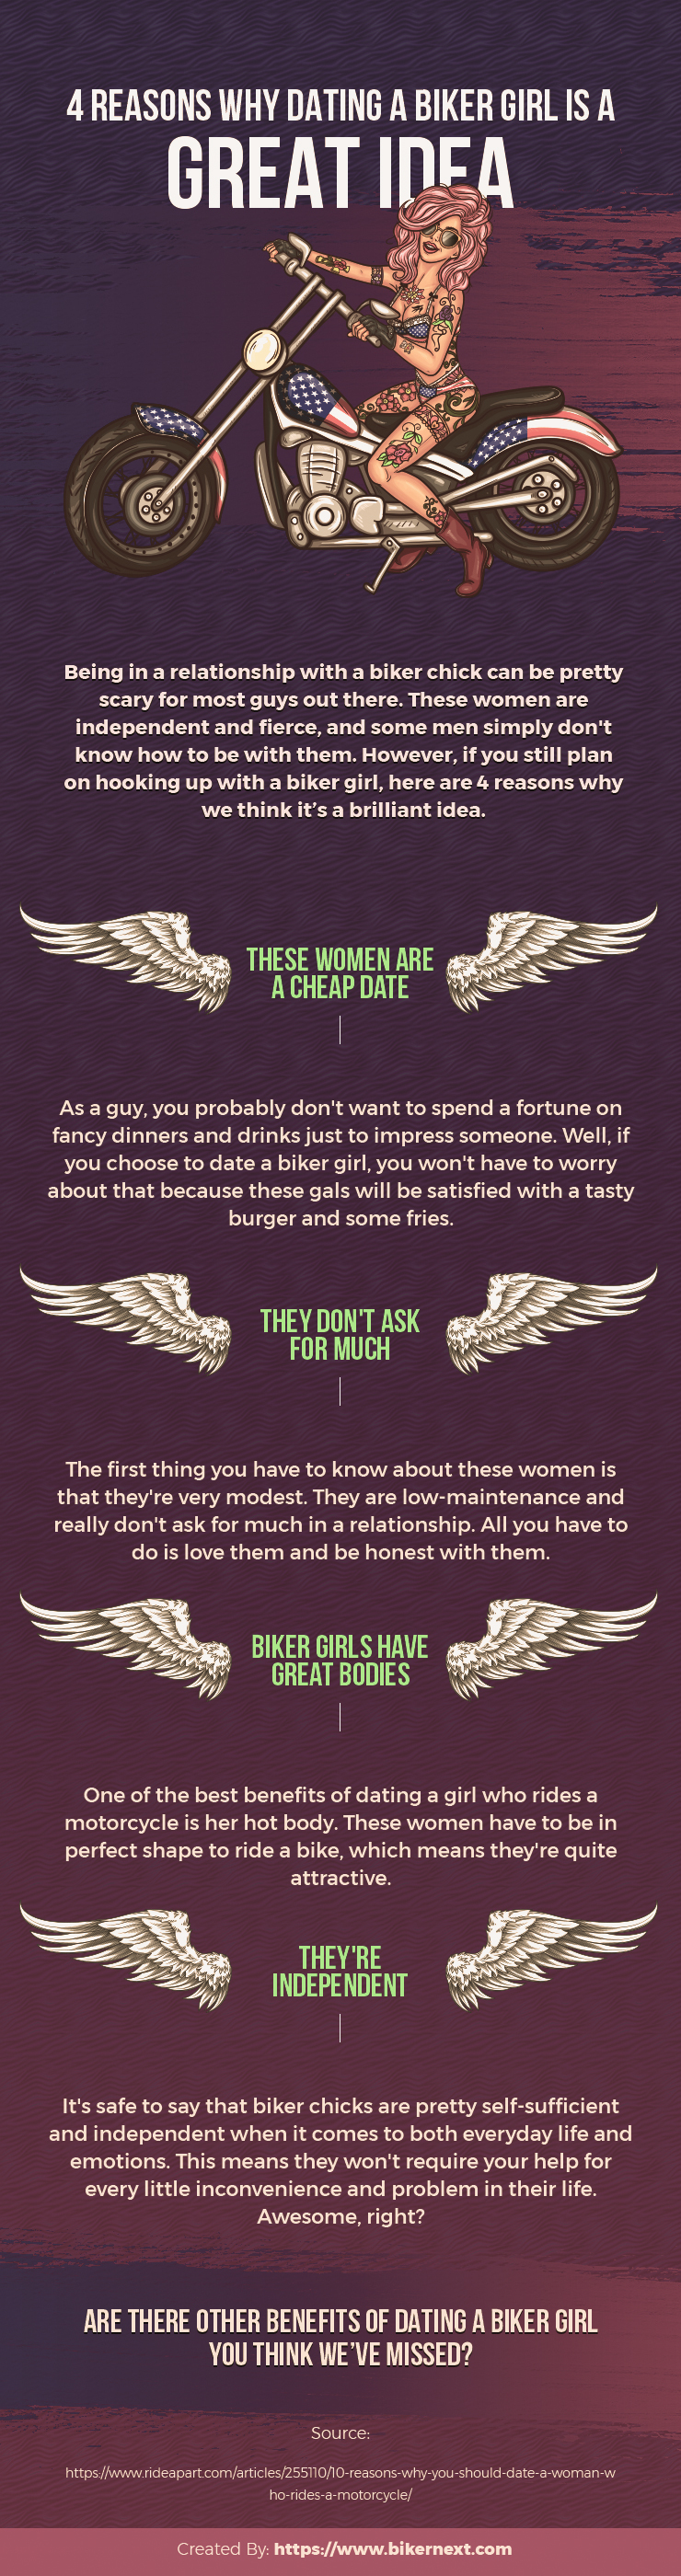 4 Reasons Why Dating a Biker Girl is a Great Idea